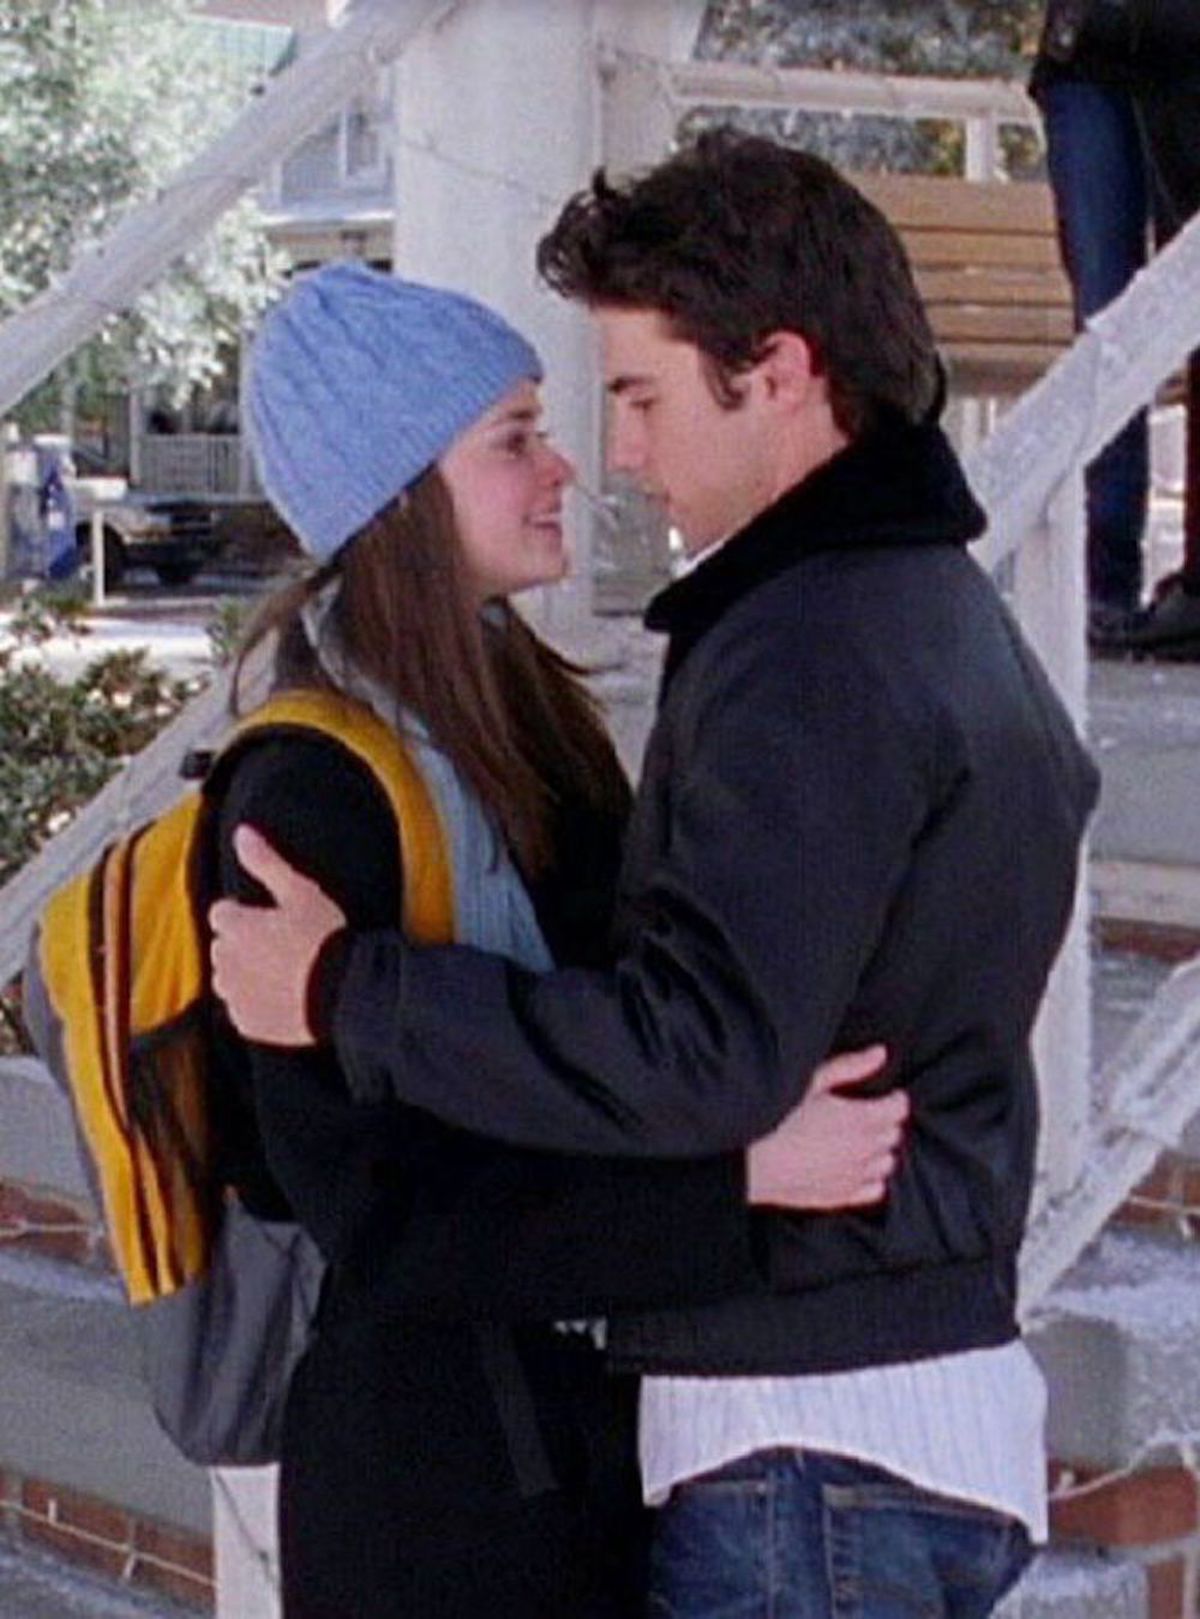 https://www.womaninrevolt.com/content/images/2019/11/Jess-Rory-Kissing-Thatll-Do-Pig-Gilmore-Girls.jpg